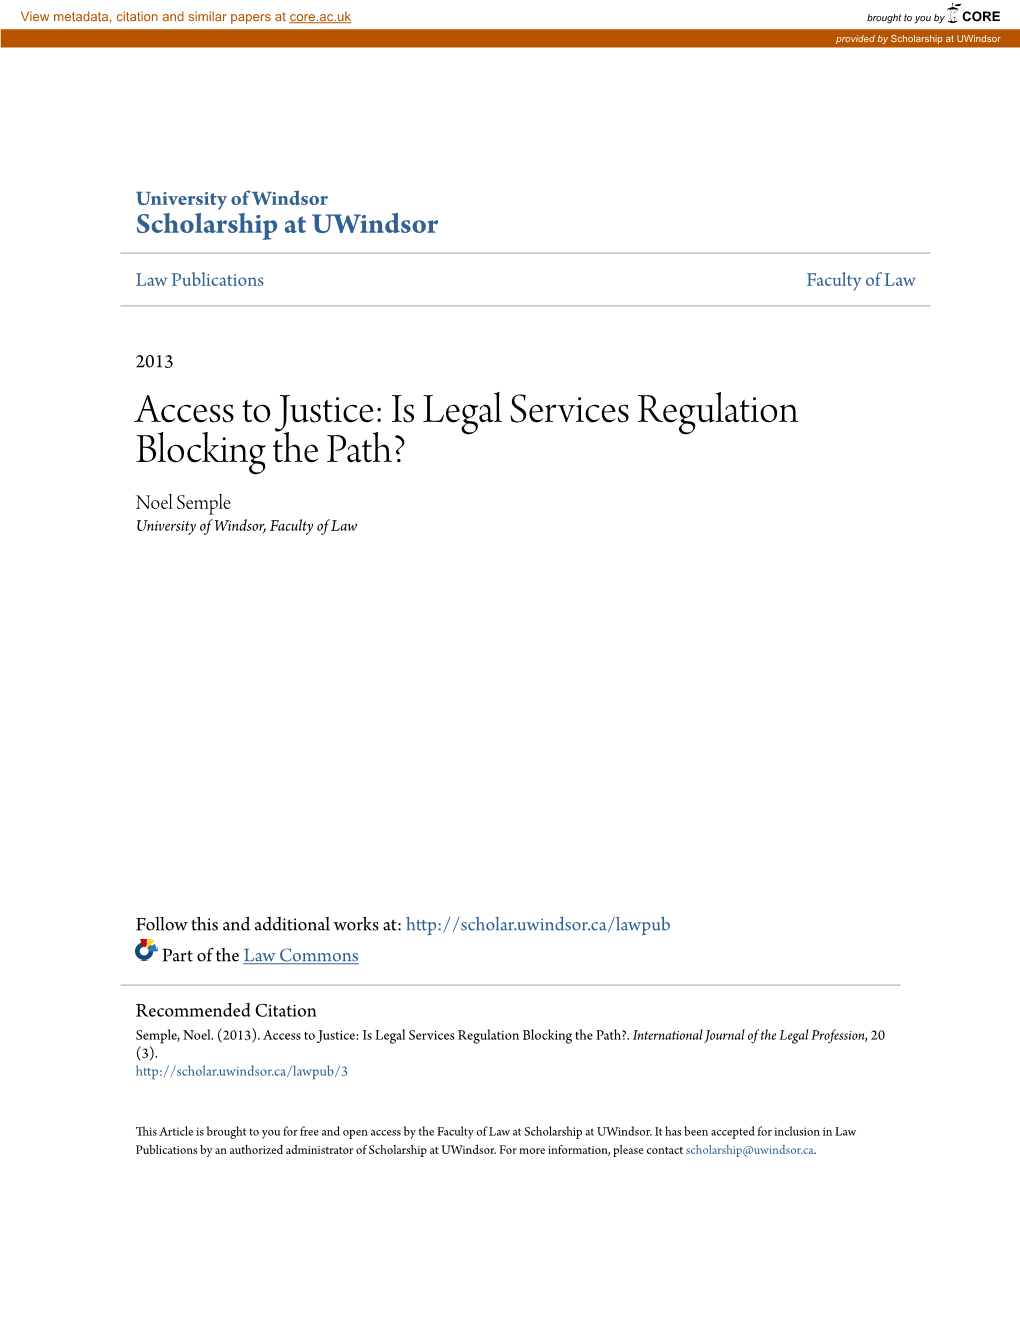 Access to Justice: Is Legal Services Regulation Blocking the Path? Noel Semple University of Windsor, Faculty of Law